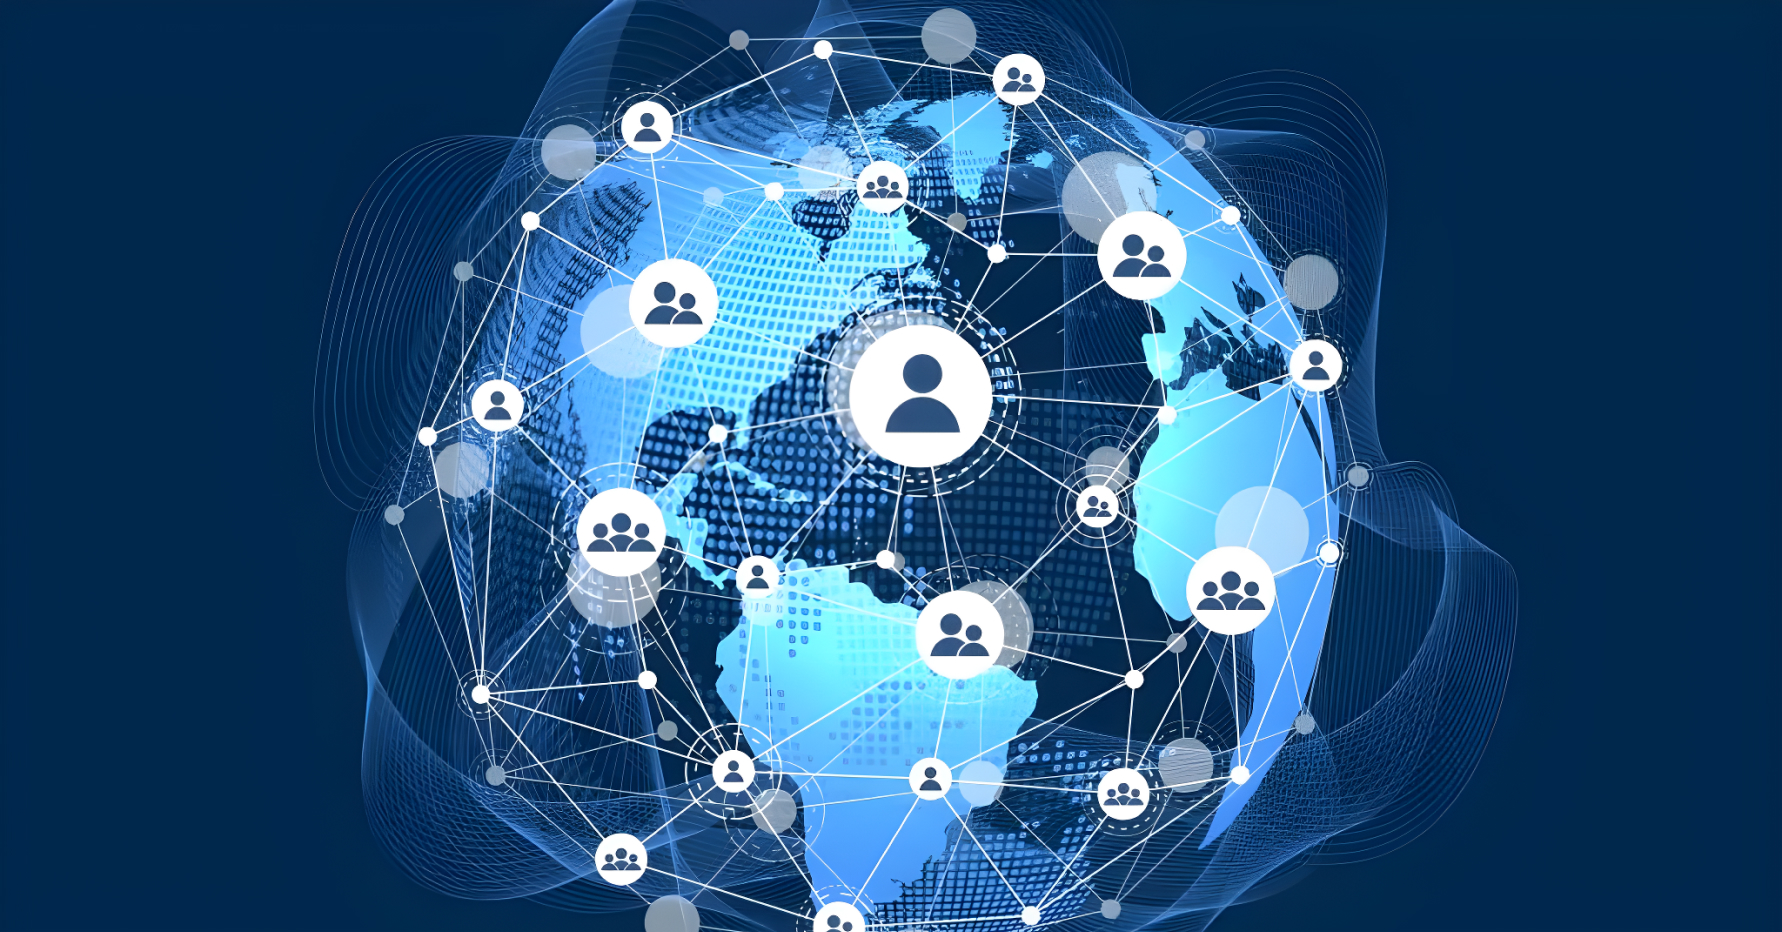 Stylistic illustration of people connected across a globe